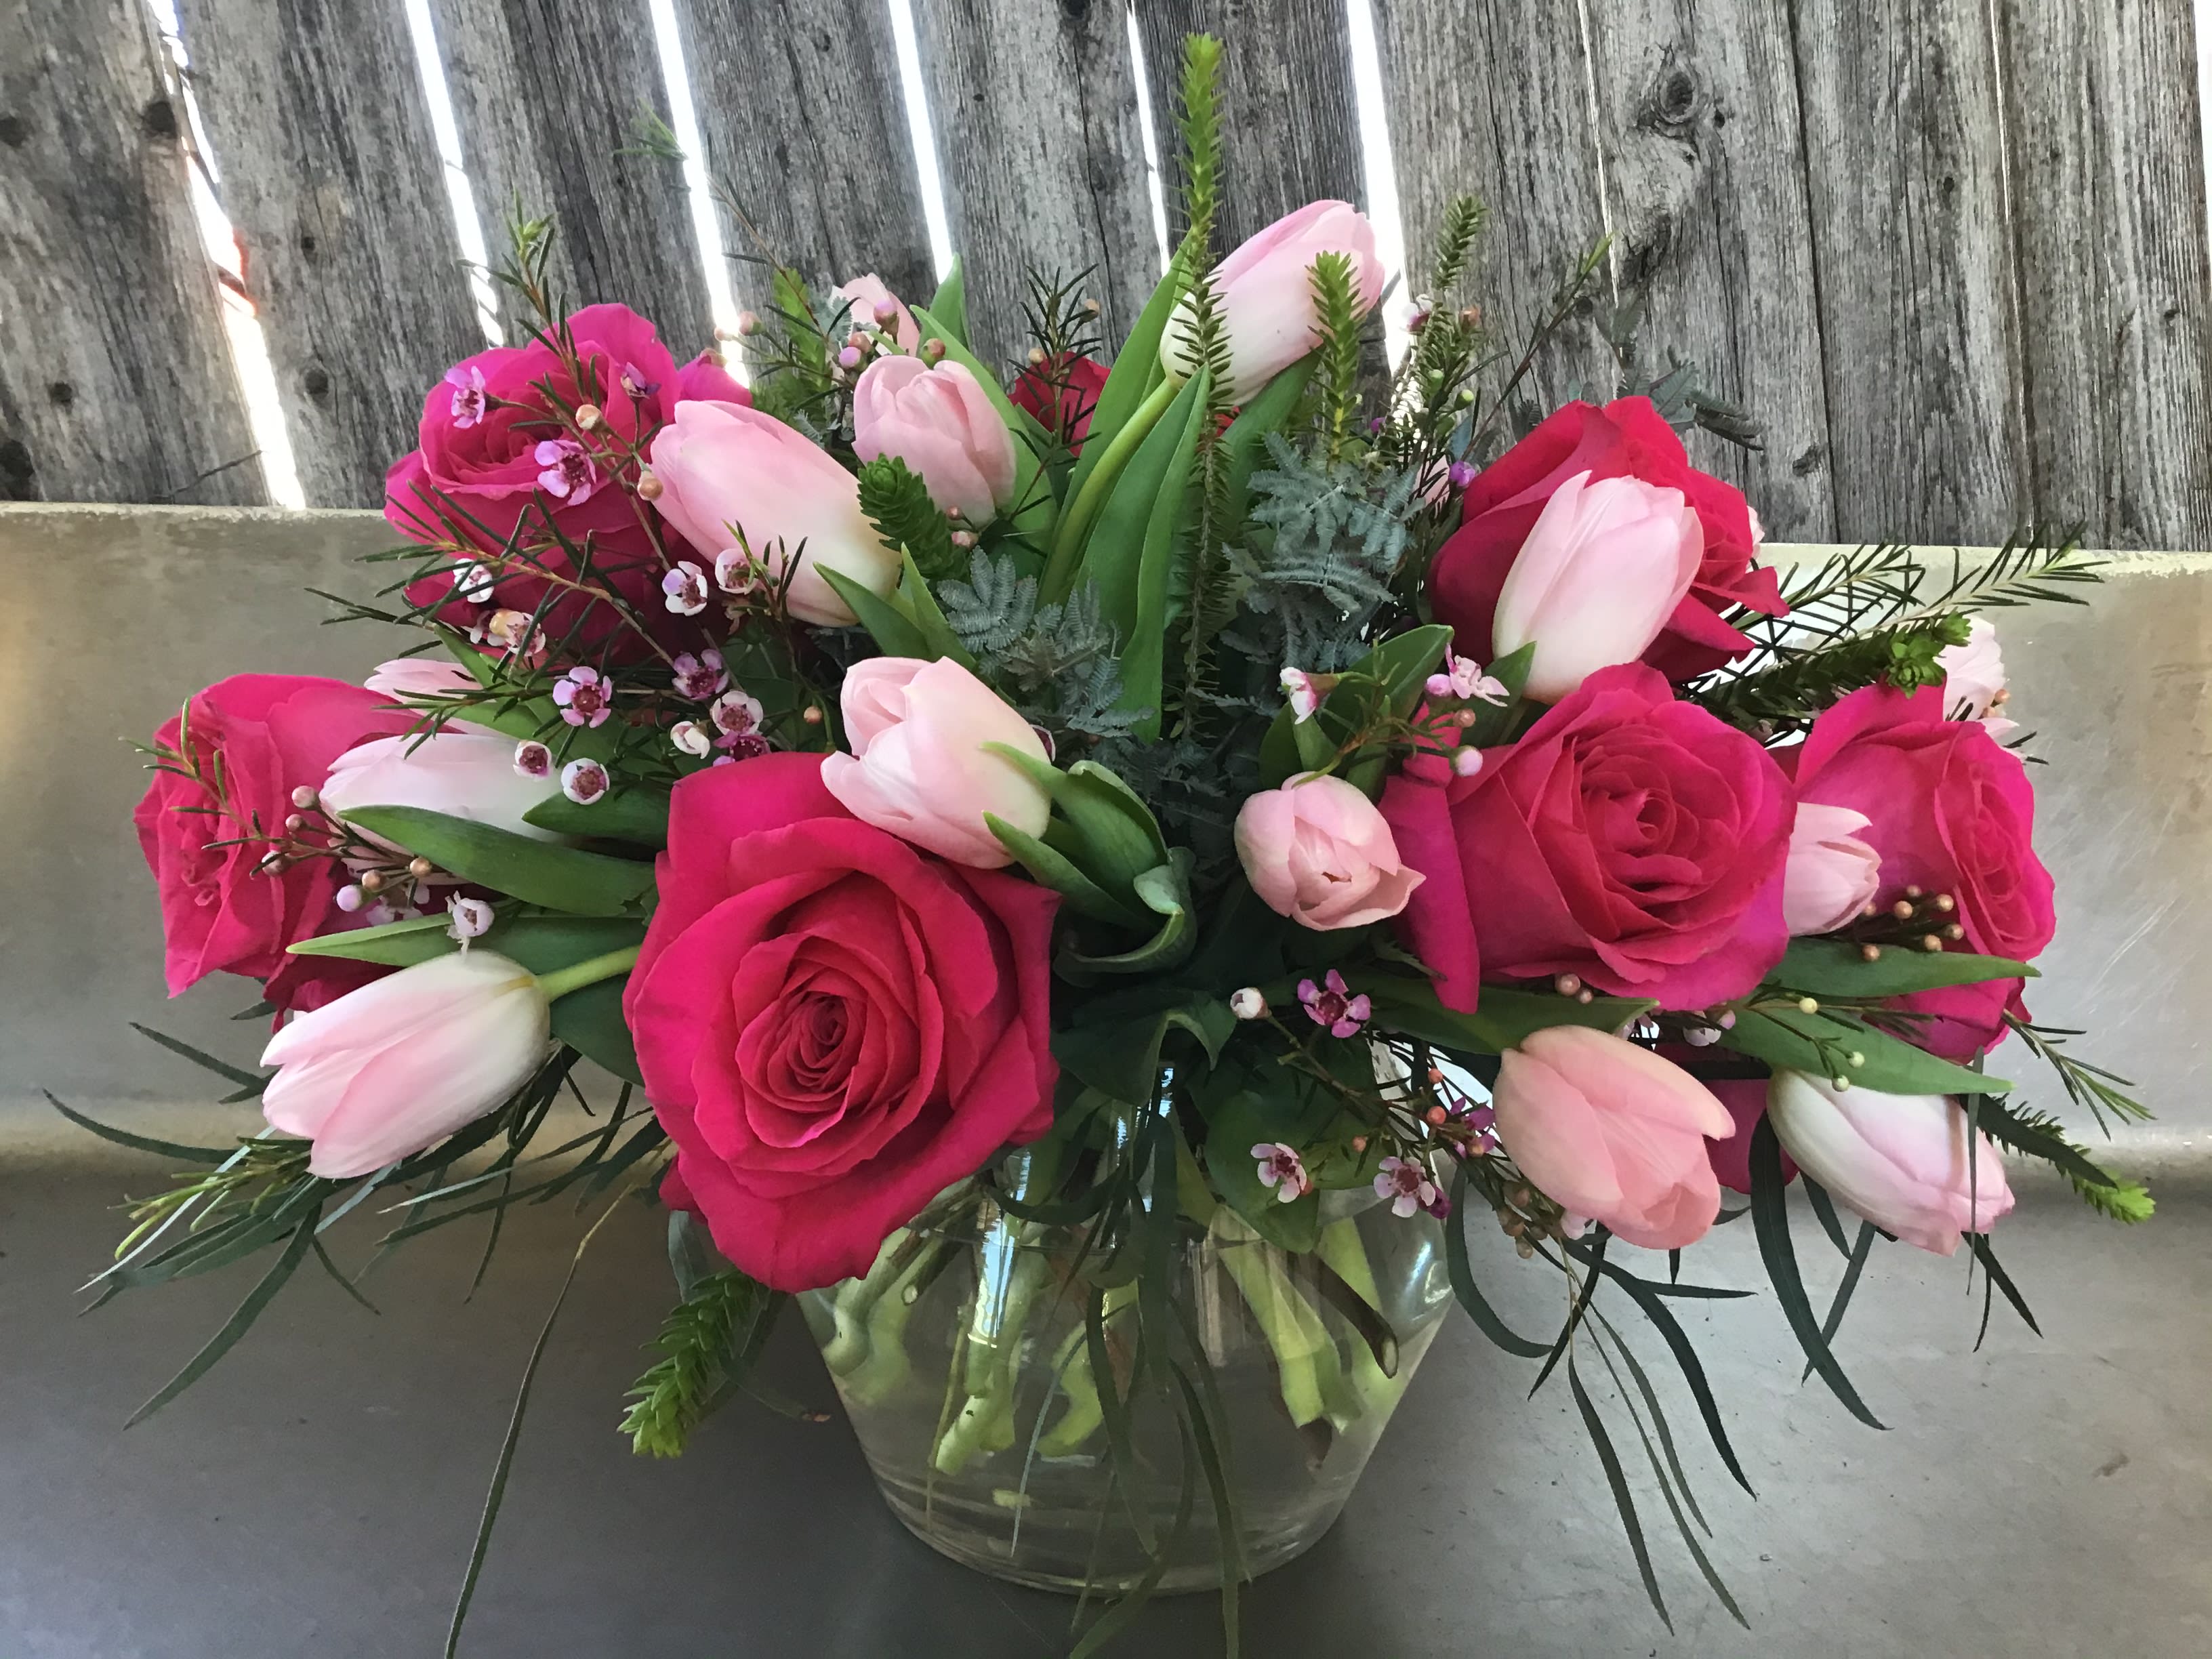 Good Wishes - Spring mix of tulips and Roses.